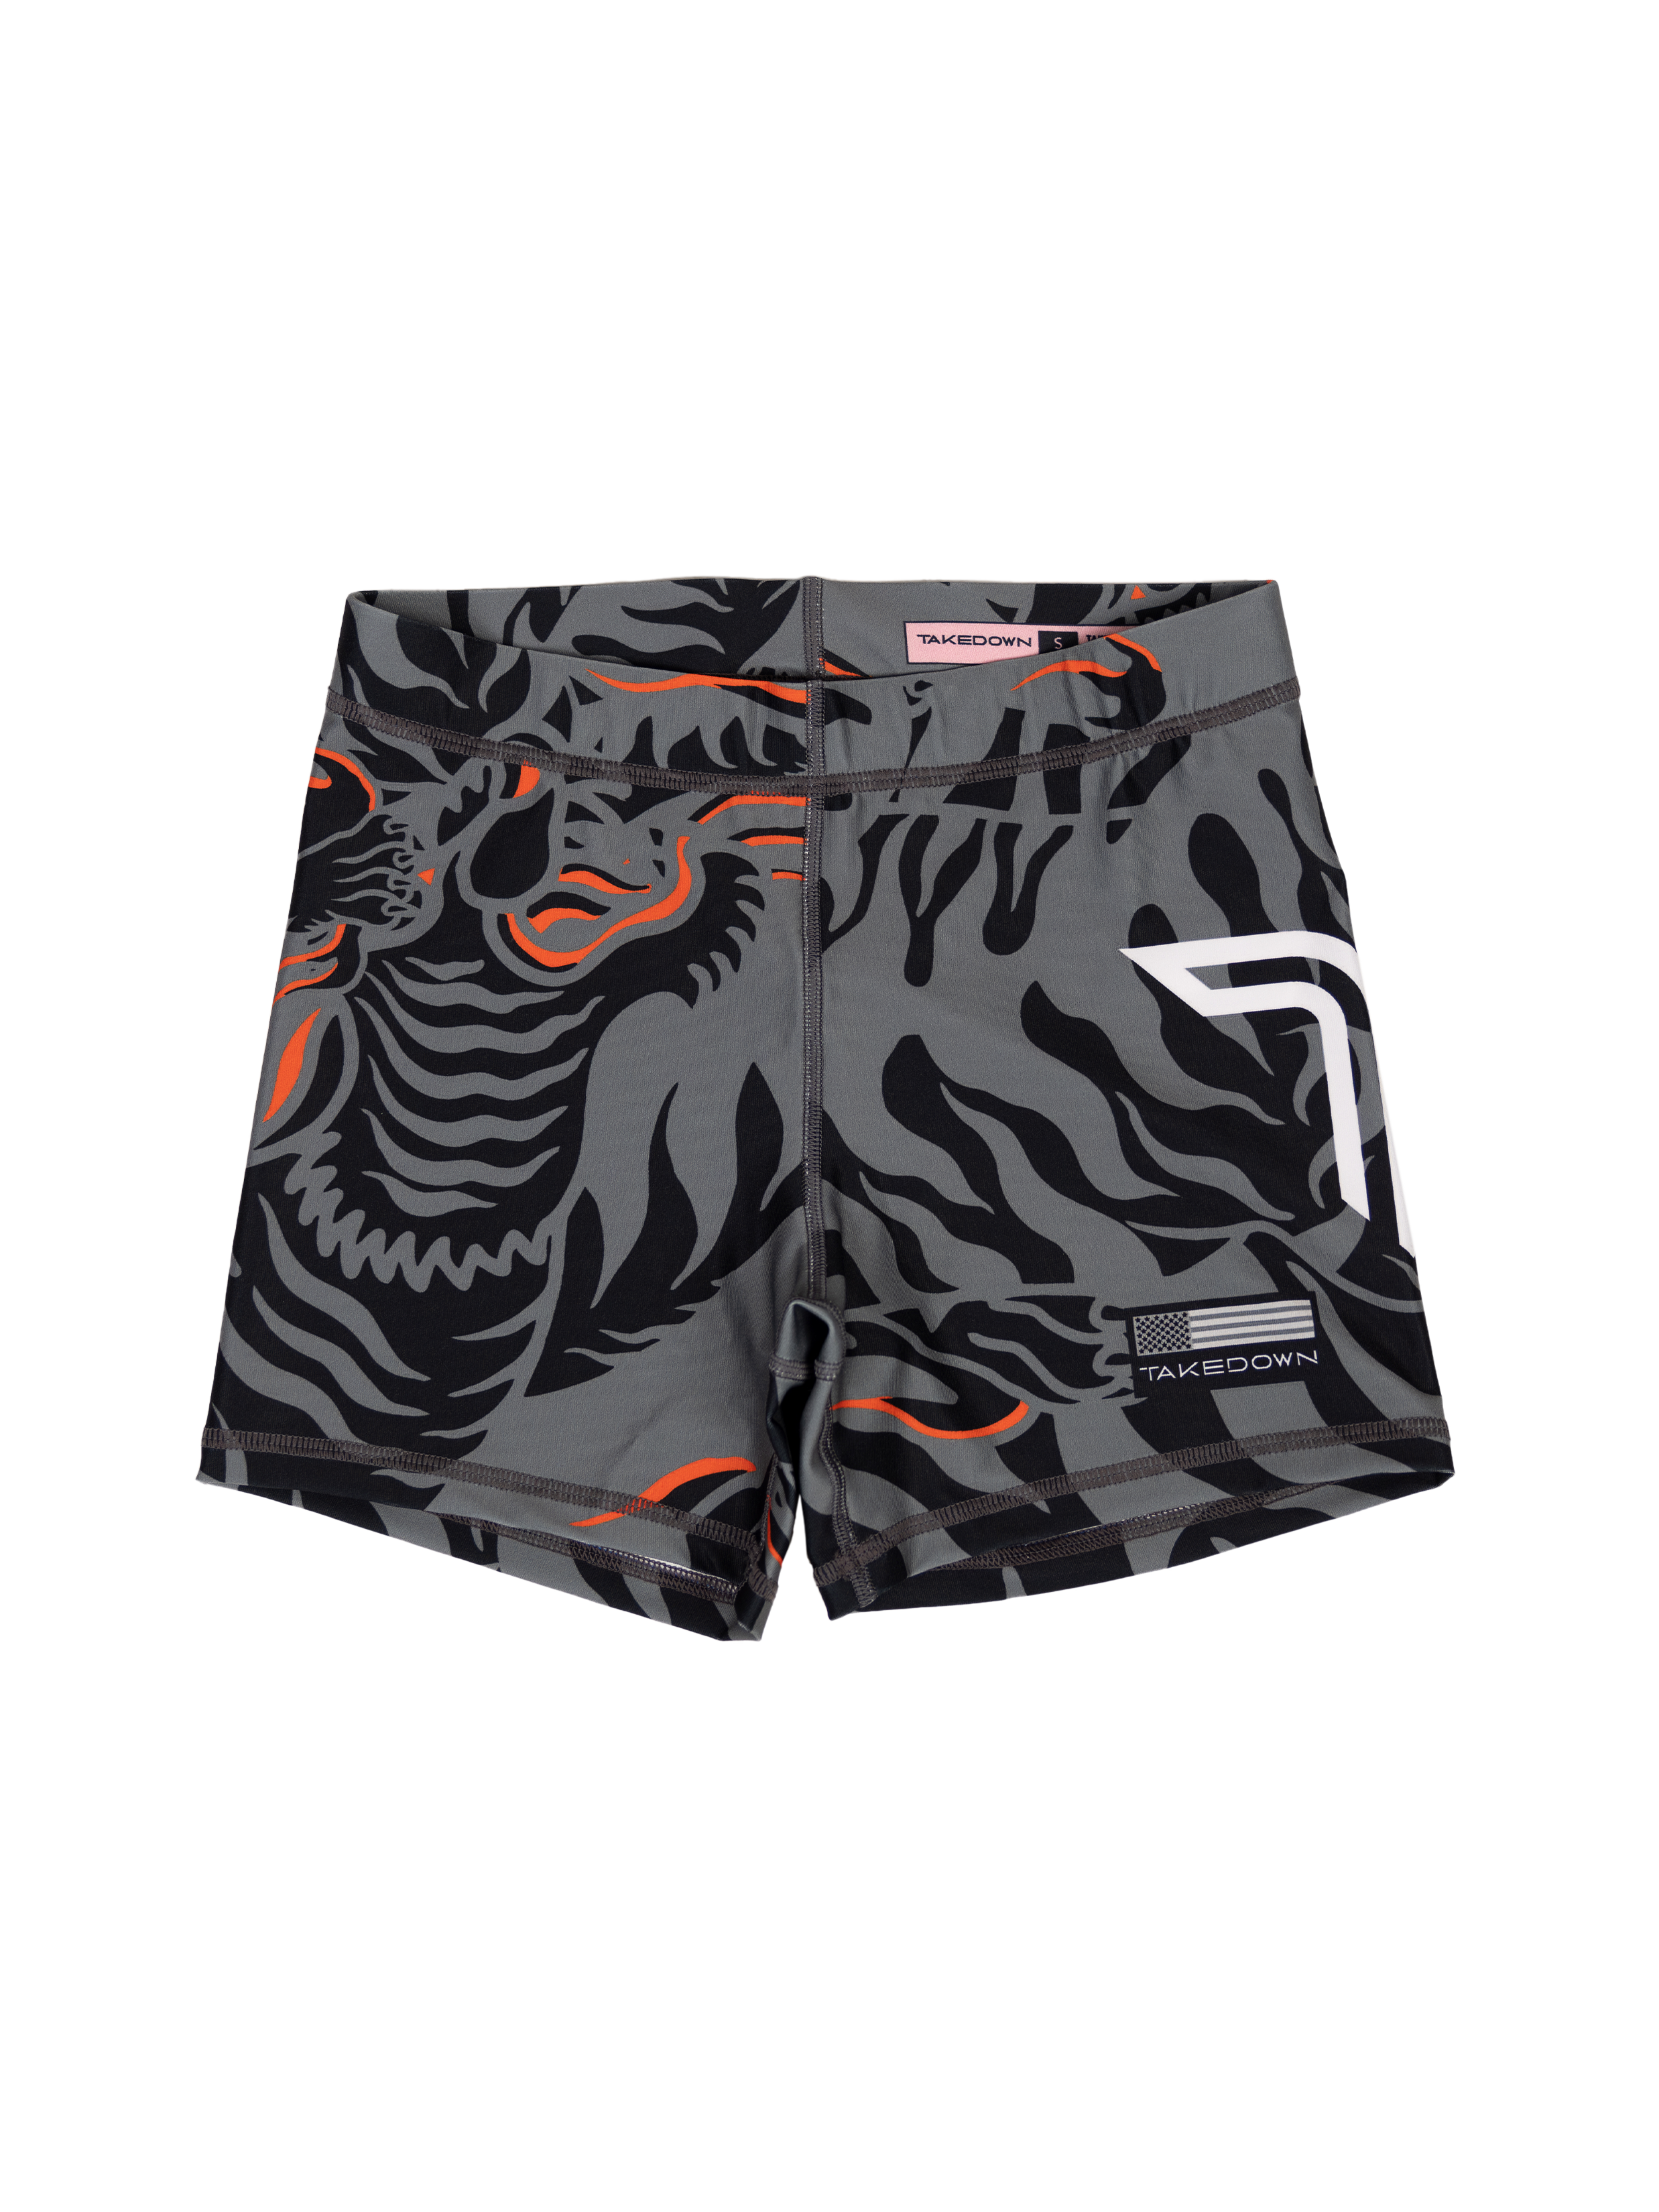 'Tiger Fight' Women's Compression Shorts - Fire Grey (4